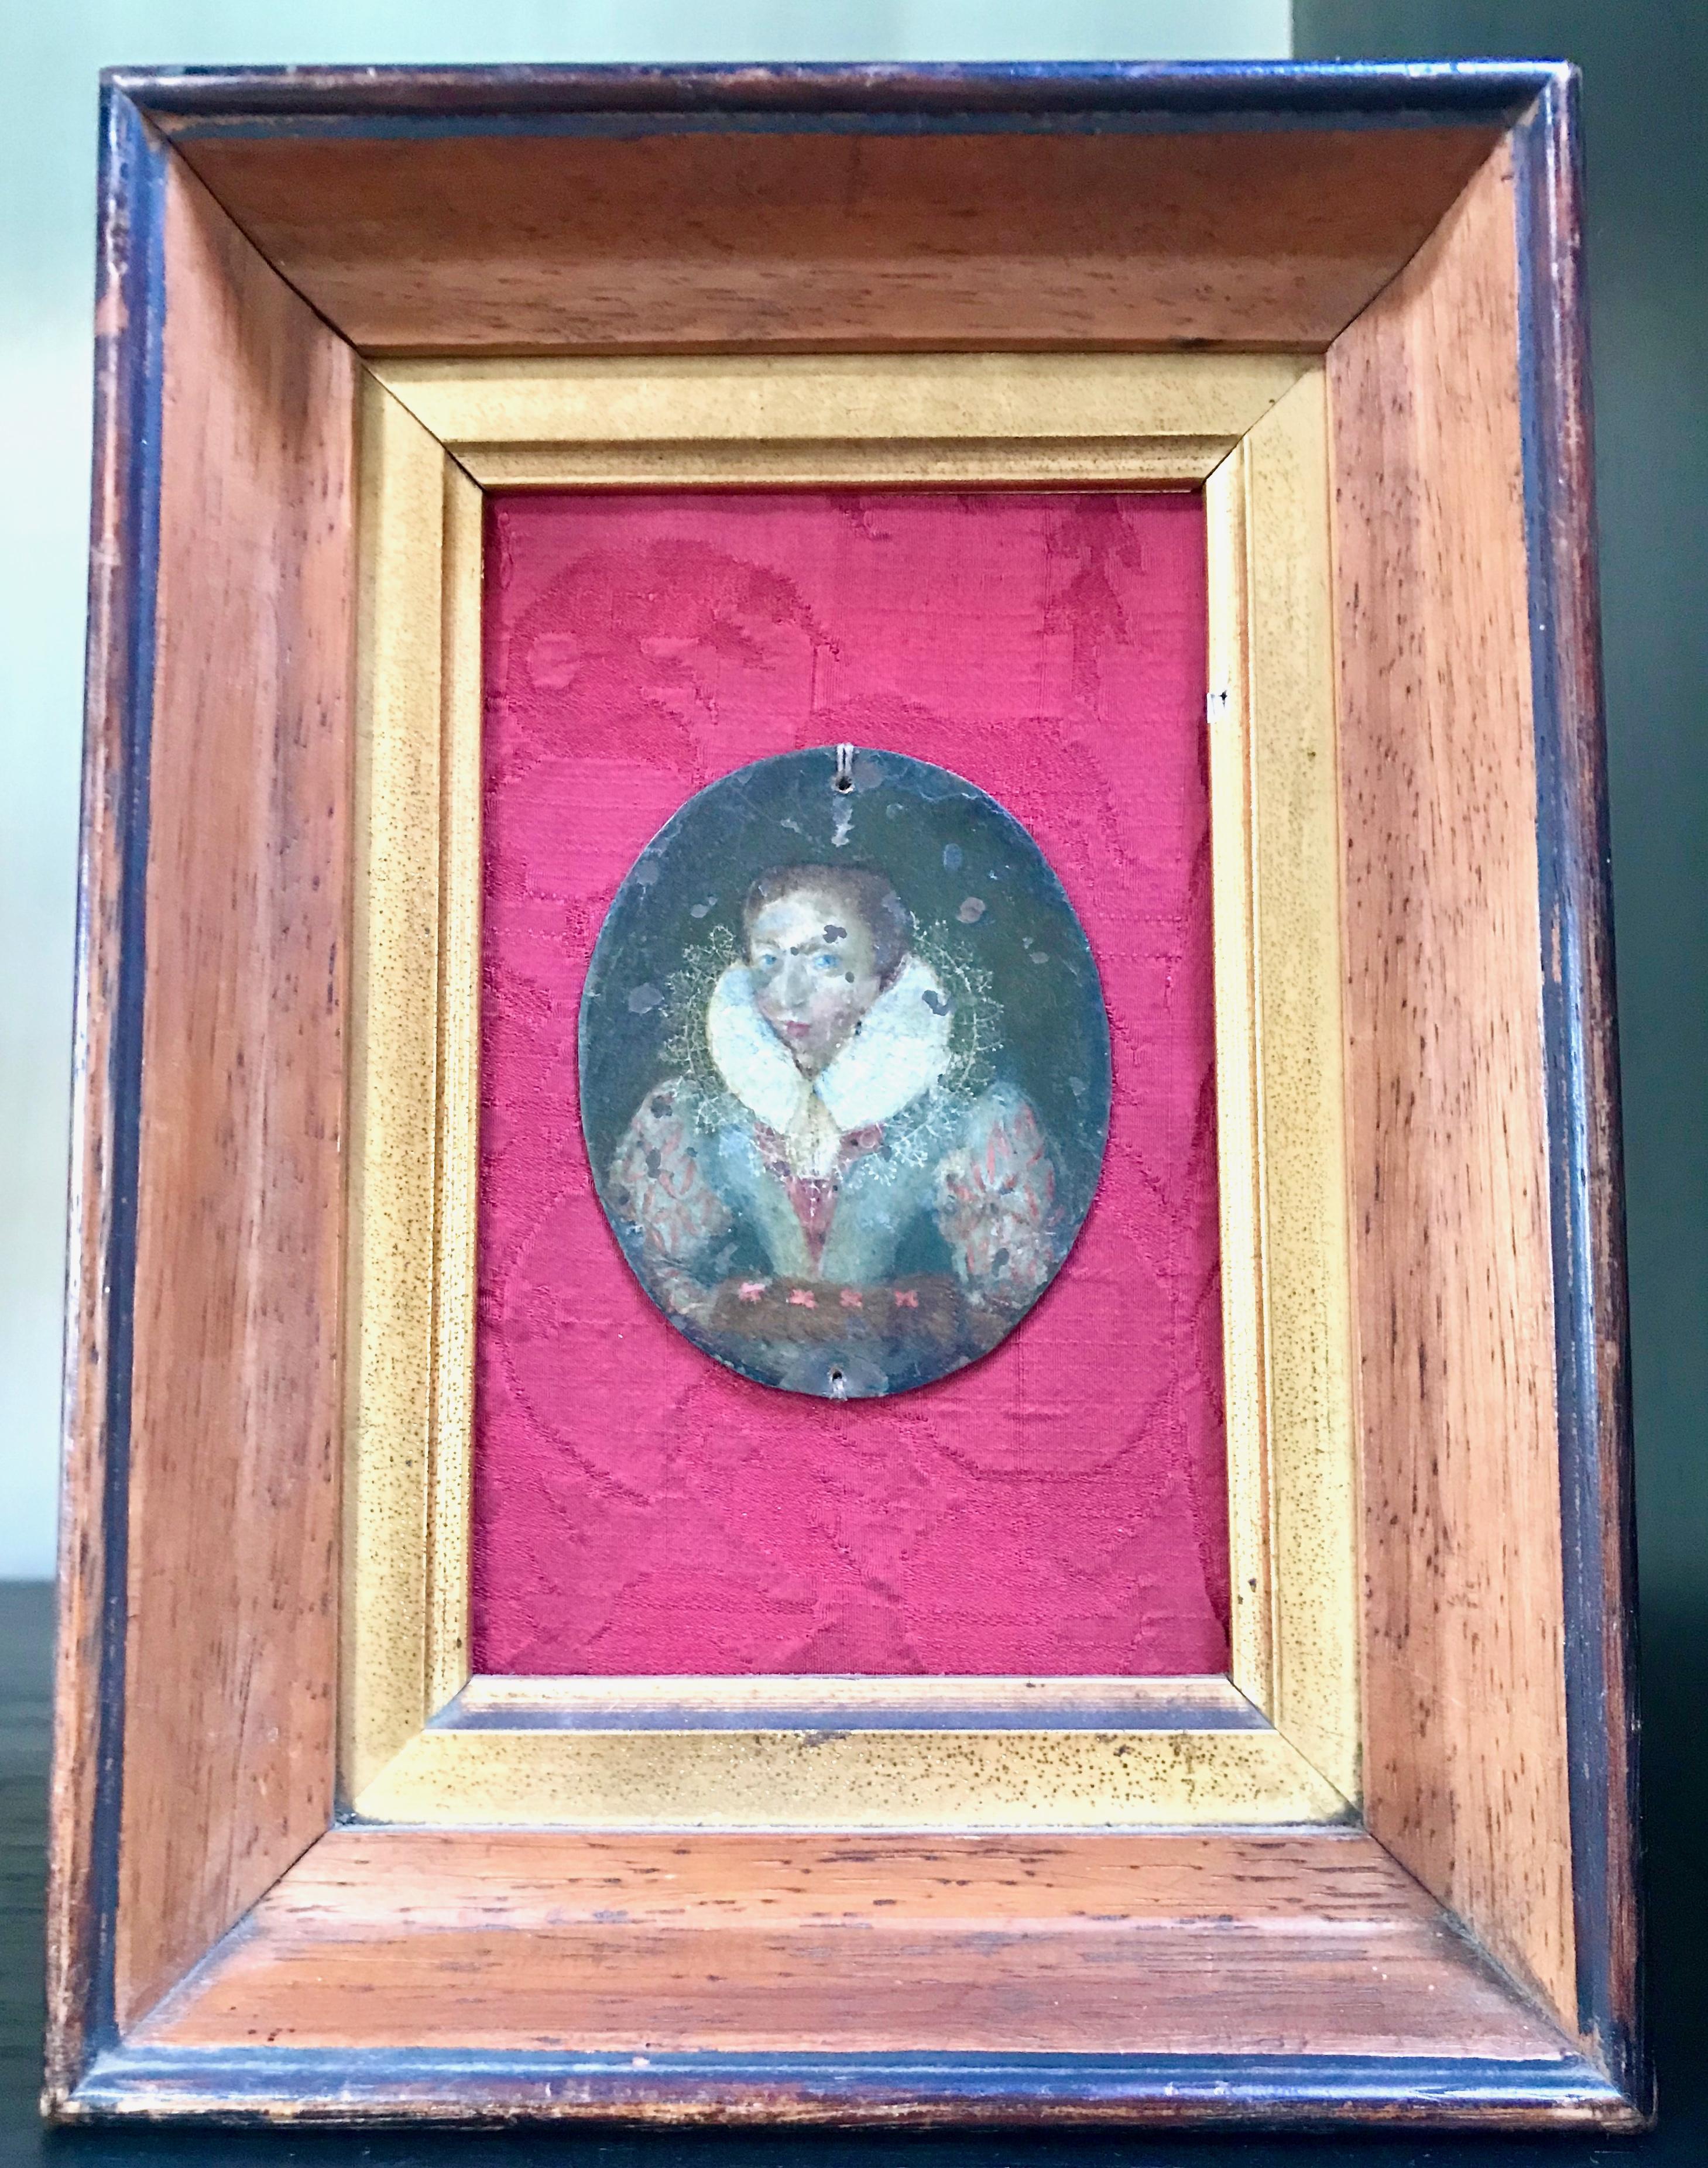 A school of Frans Pourbus The Younger (Flemish, 1579-1622), 17th century Baroque Miniature painting in vitreous enamel on copper of a noblewoman.
Miniature portraits to carry as a personal memento was the height of fashion for the wealthy in the